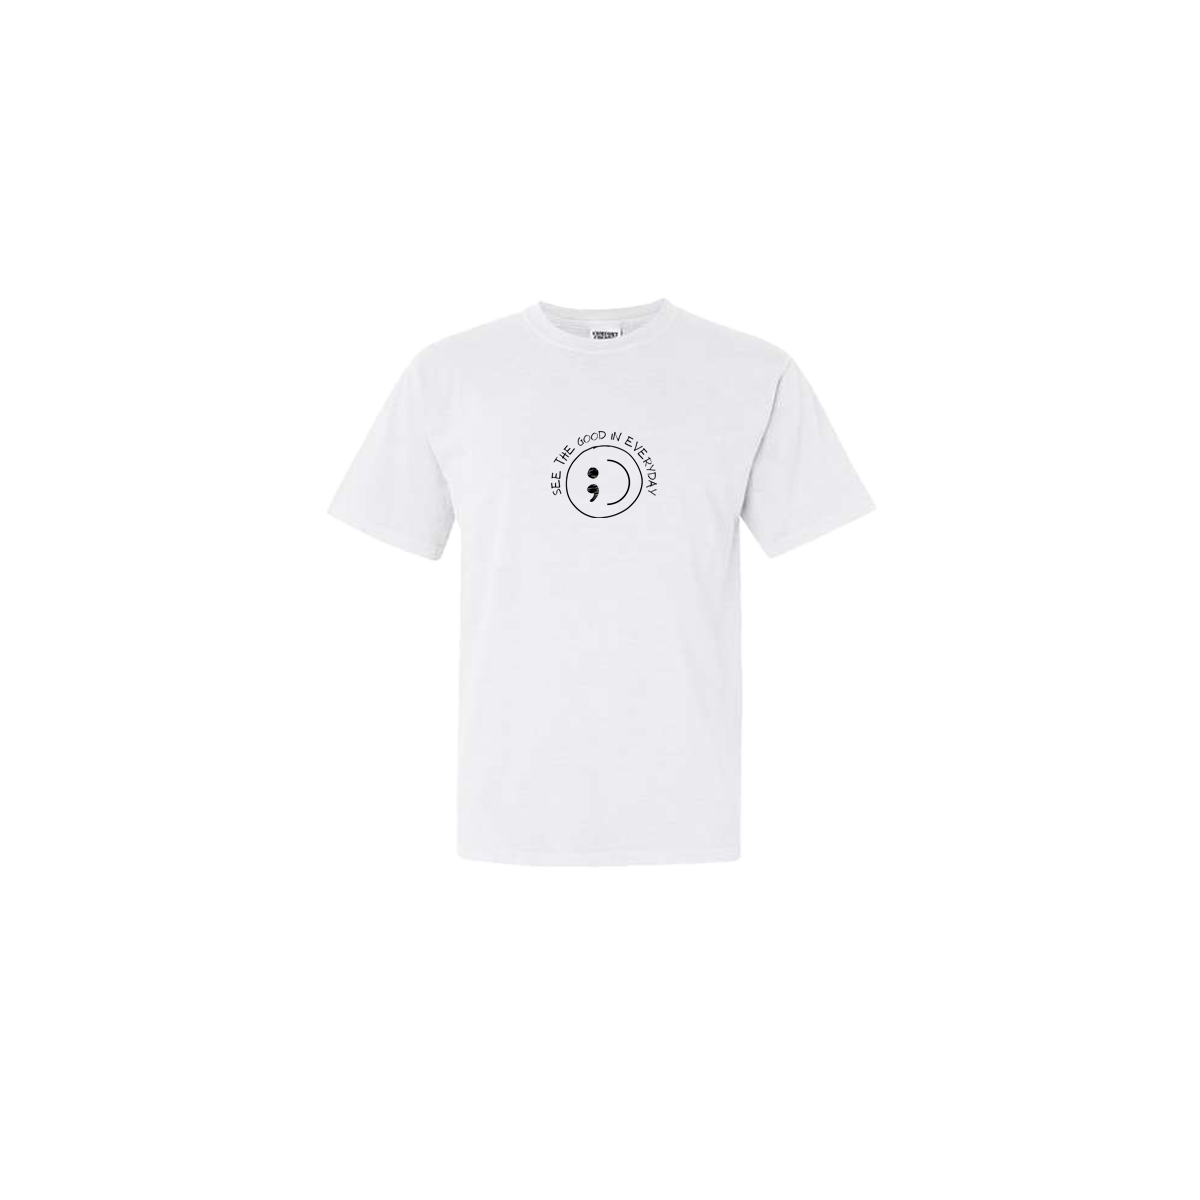 See the Good in Everyday Smiley Embroidered White Tshirt - Mental Health Awareness Clothing